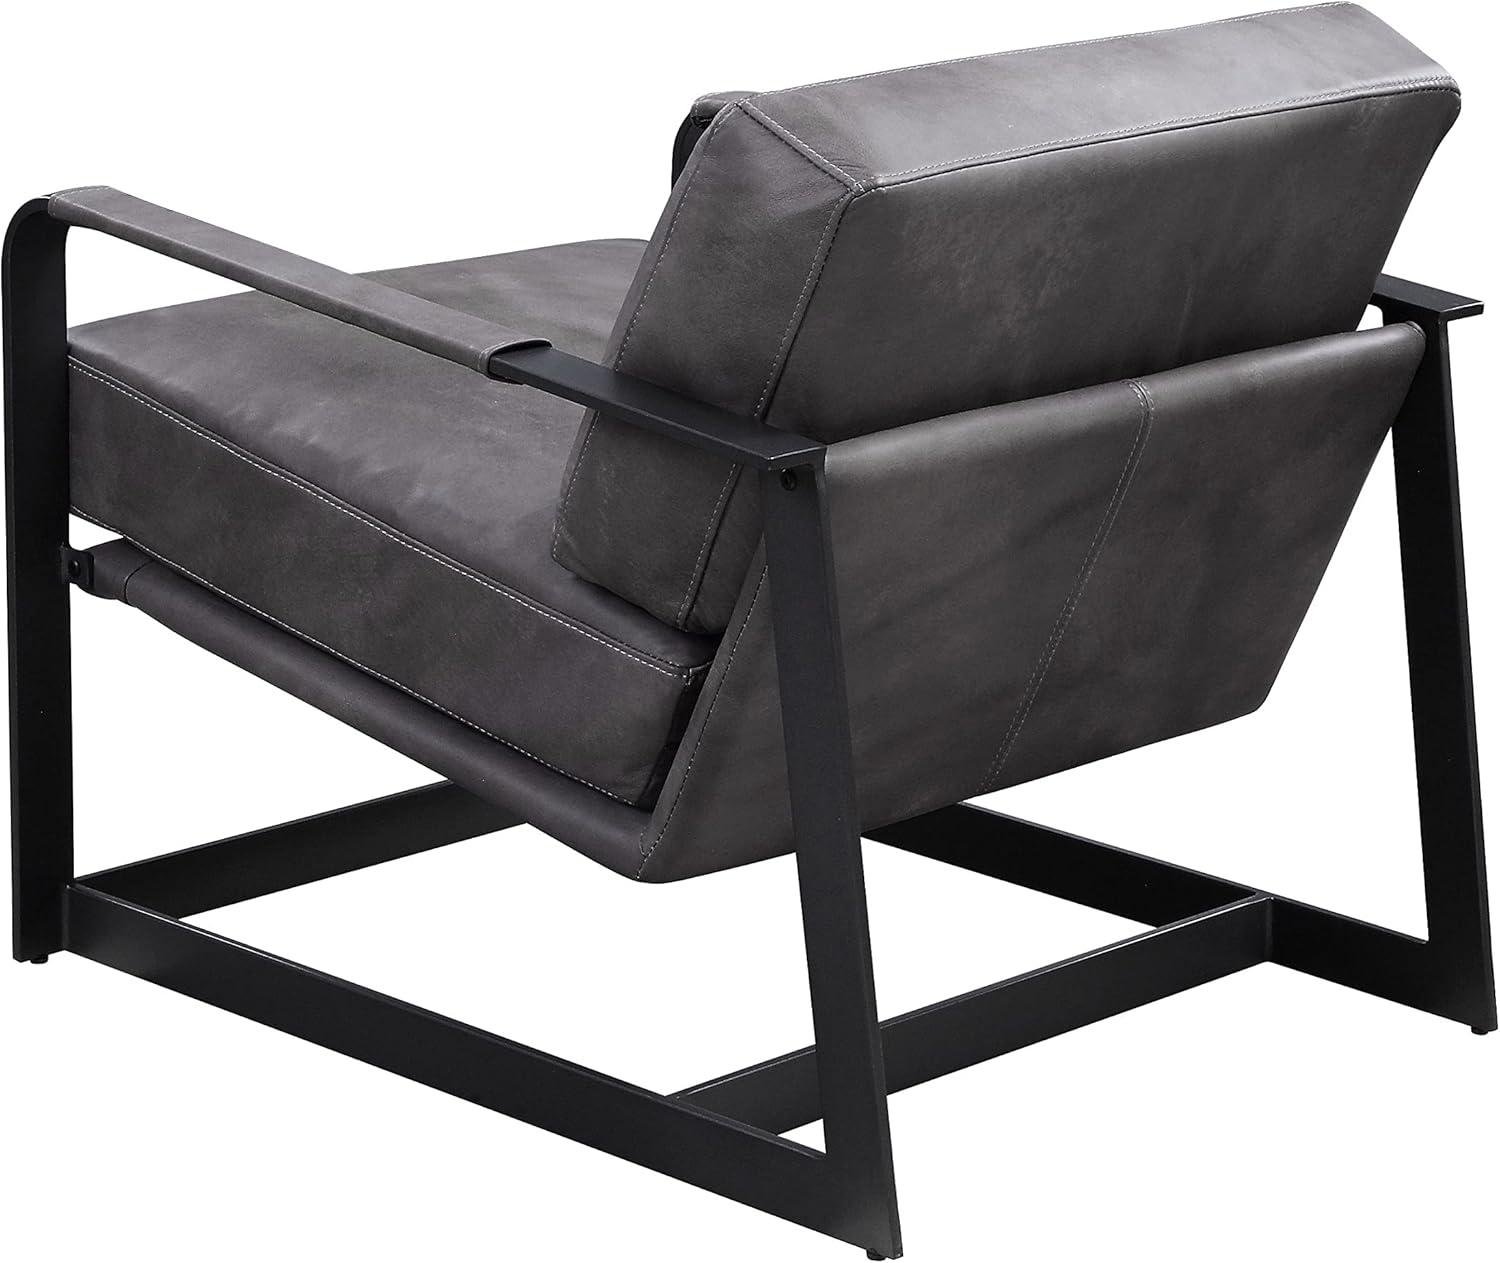 Locnos 33" Gray Top Grain Leather & Metal Frame Accent Chair